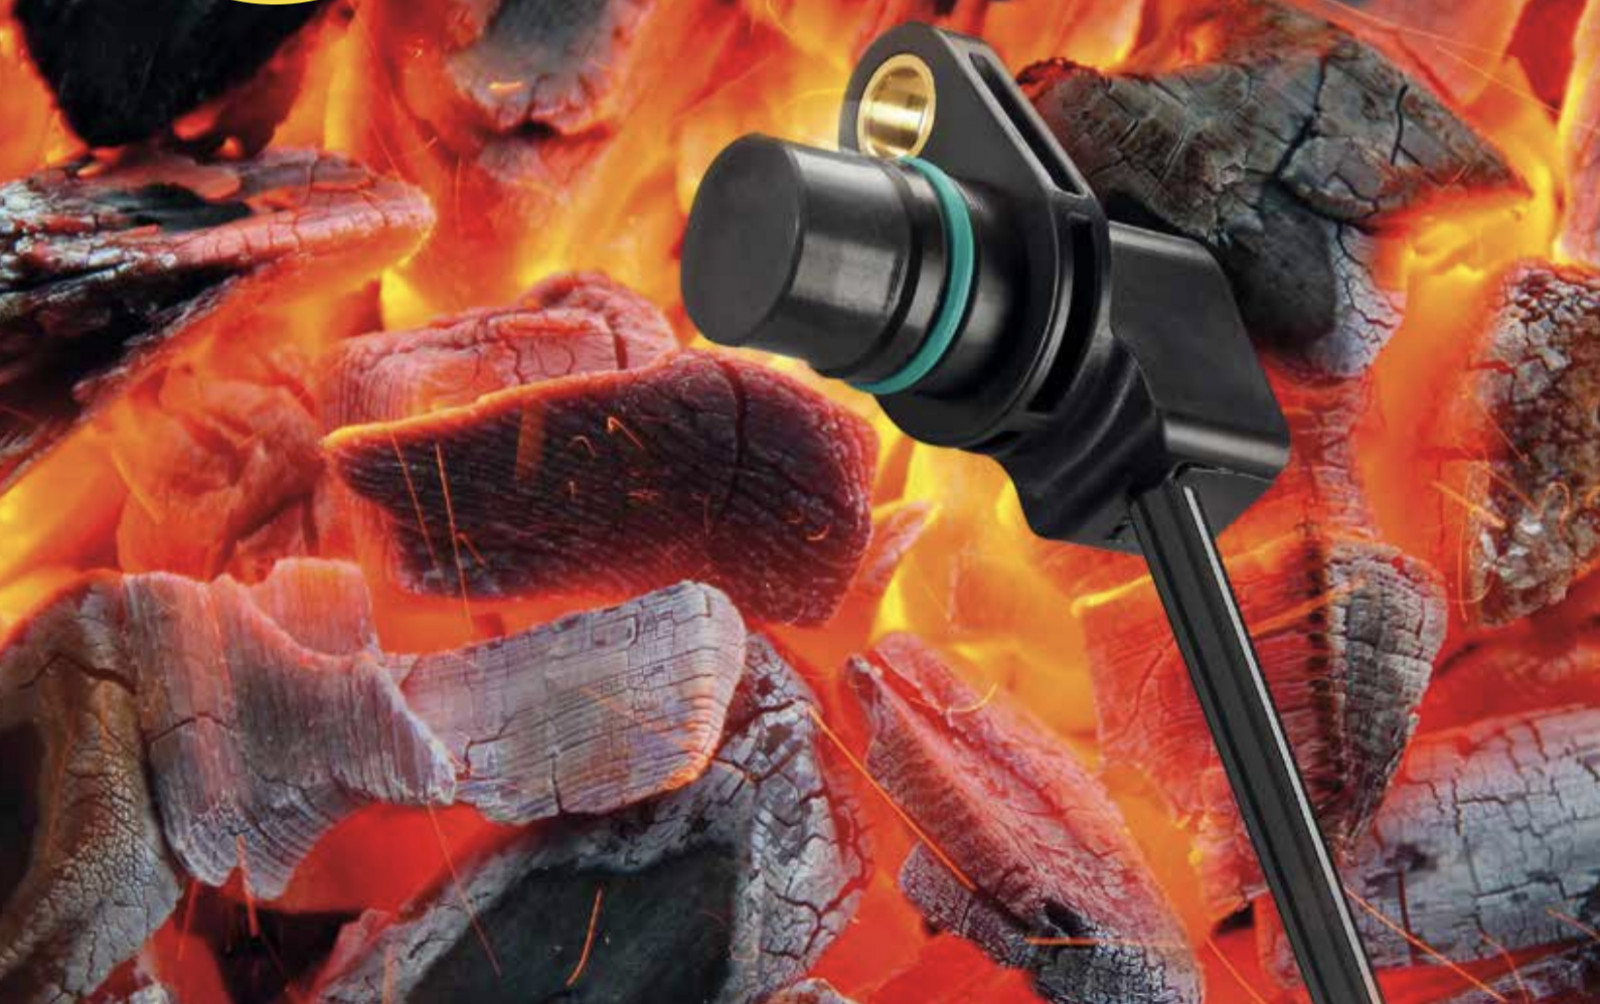 Rotational speed sensor for hottest environments